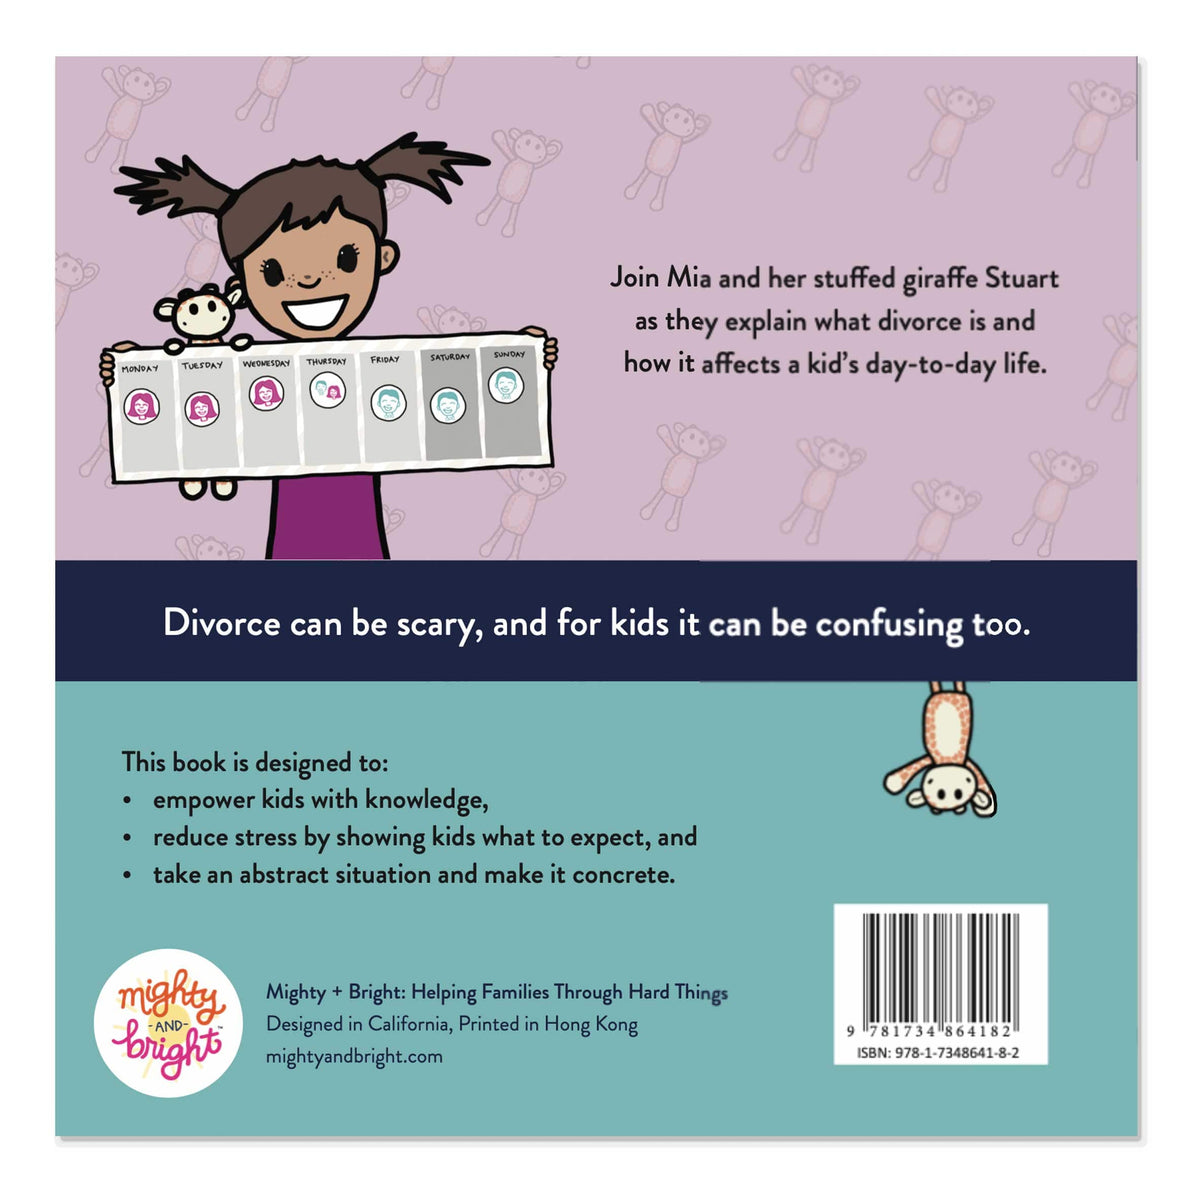 What Happens When parents get Divorced? Children&#39;s book written by Sara Olsher. Join Mia and her stuffed giraffe Stuart as they explain what divorce is and how it affects a kid&#39;s day-to-day life. Divorce can be scary, and for kids it can be confusing too. This book is designed to: empower kids with knowledge, reduce stress by showing kids what to expect, and take an abstract situation and make it concrete.